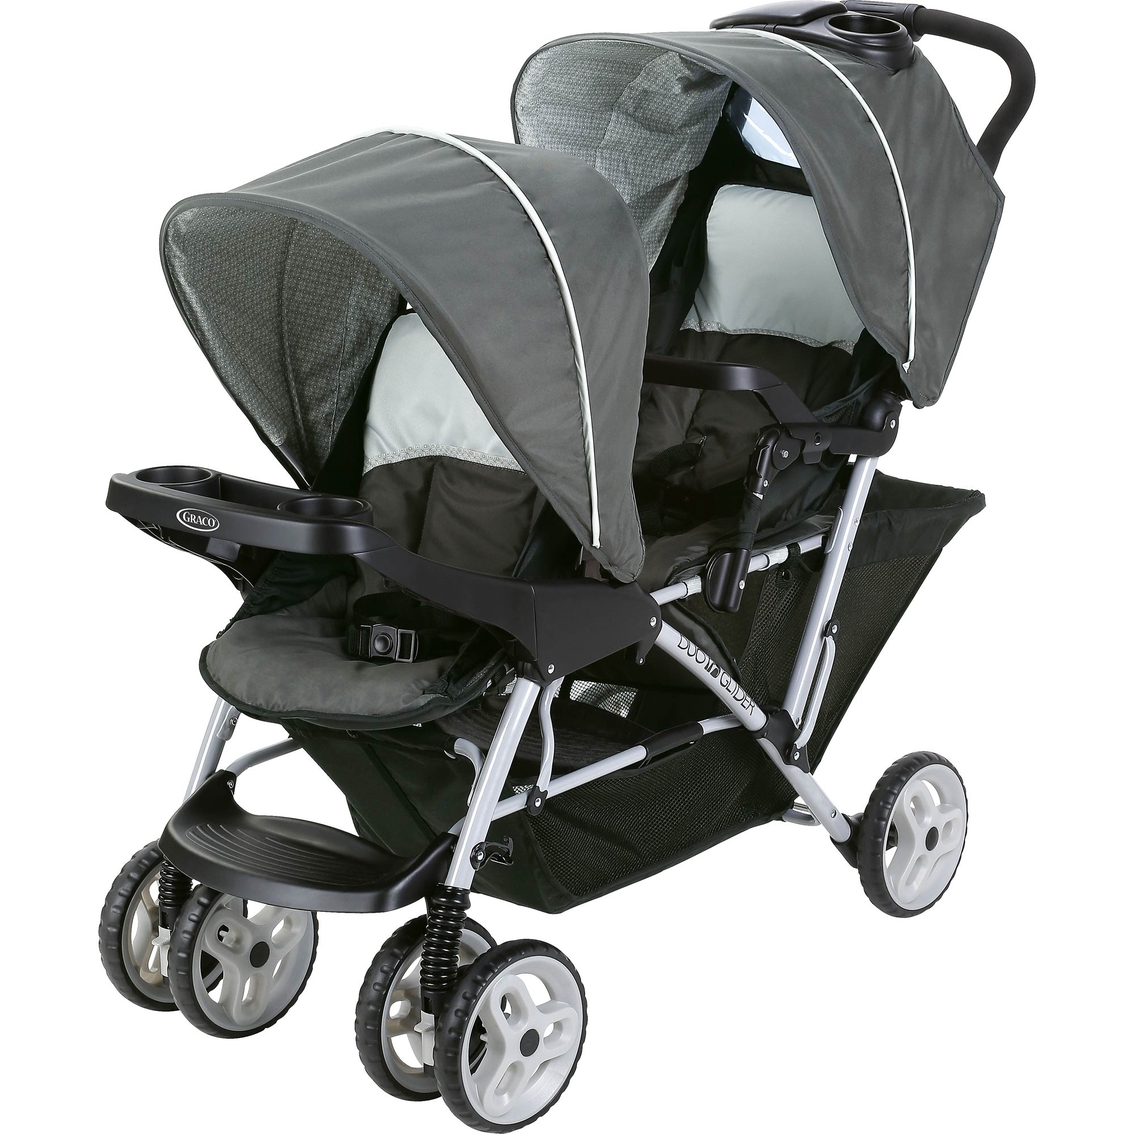 graco duoglider click connect stroller manual